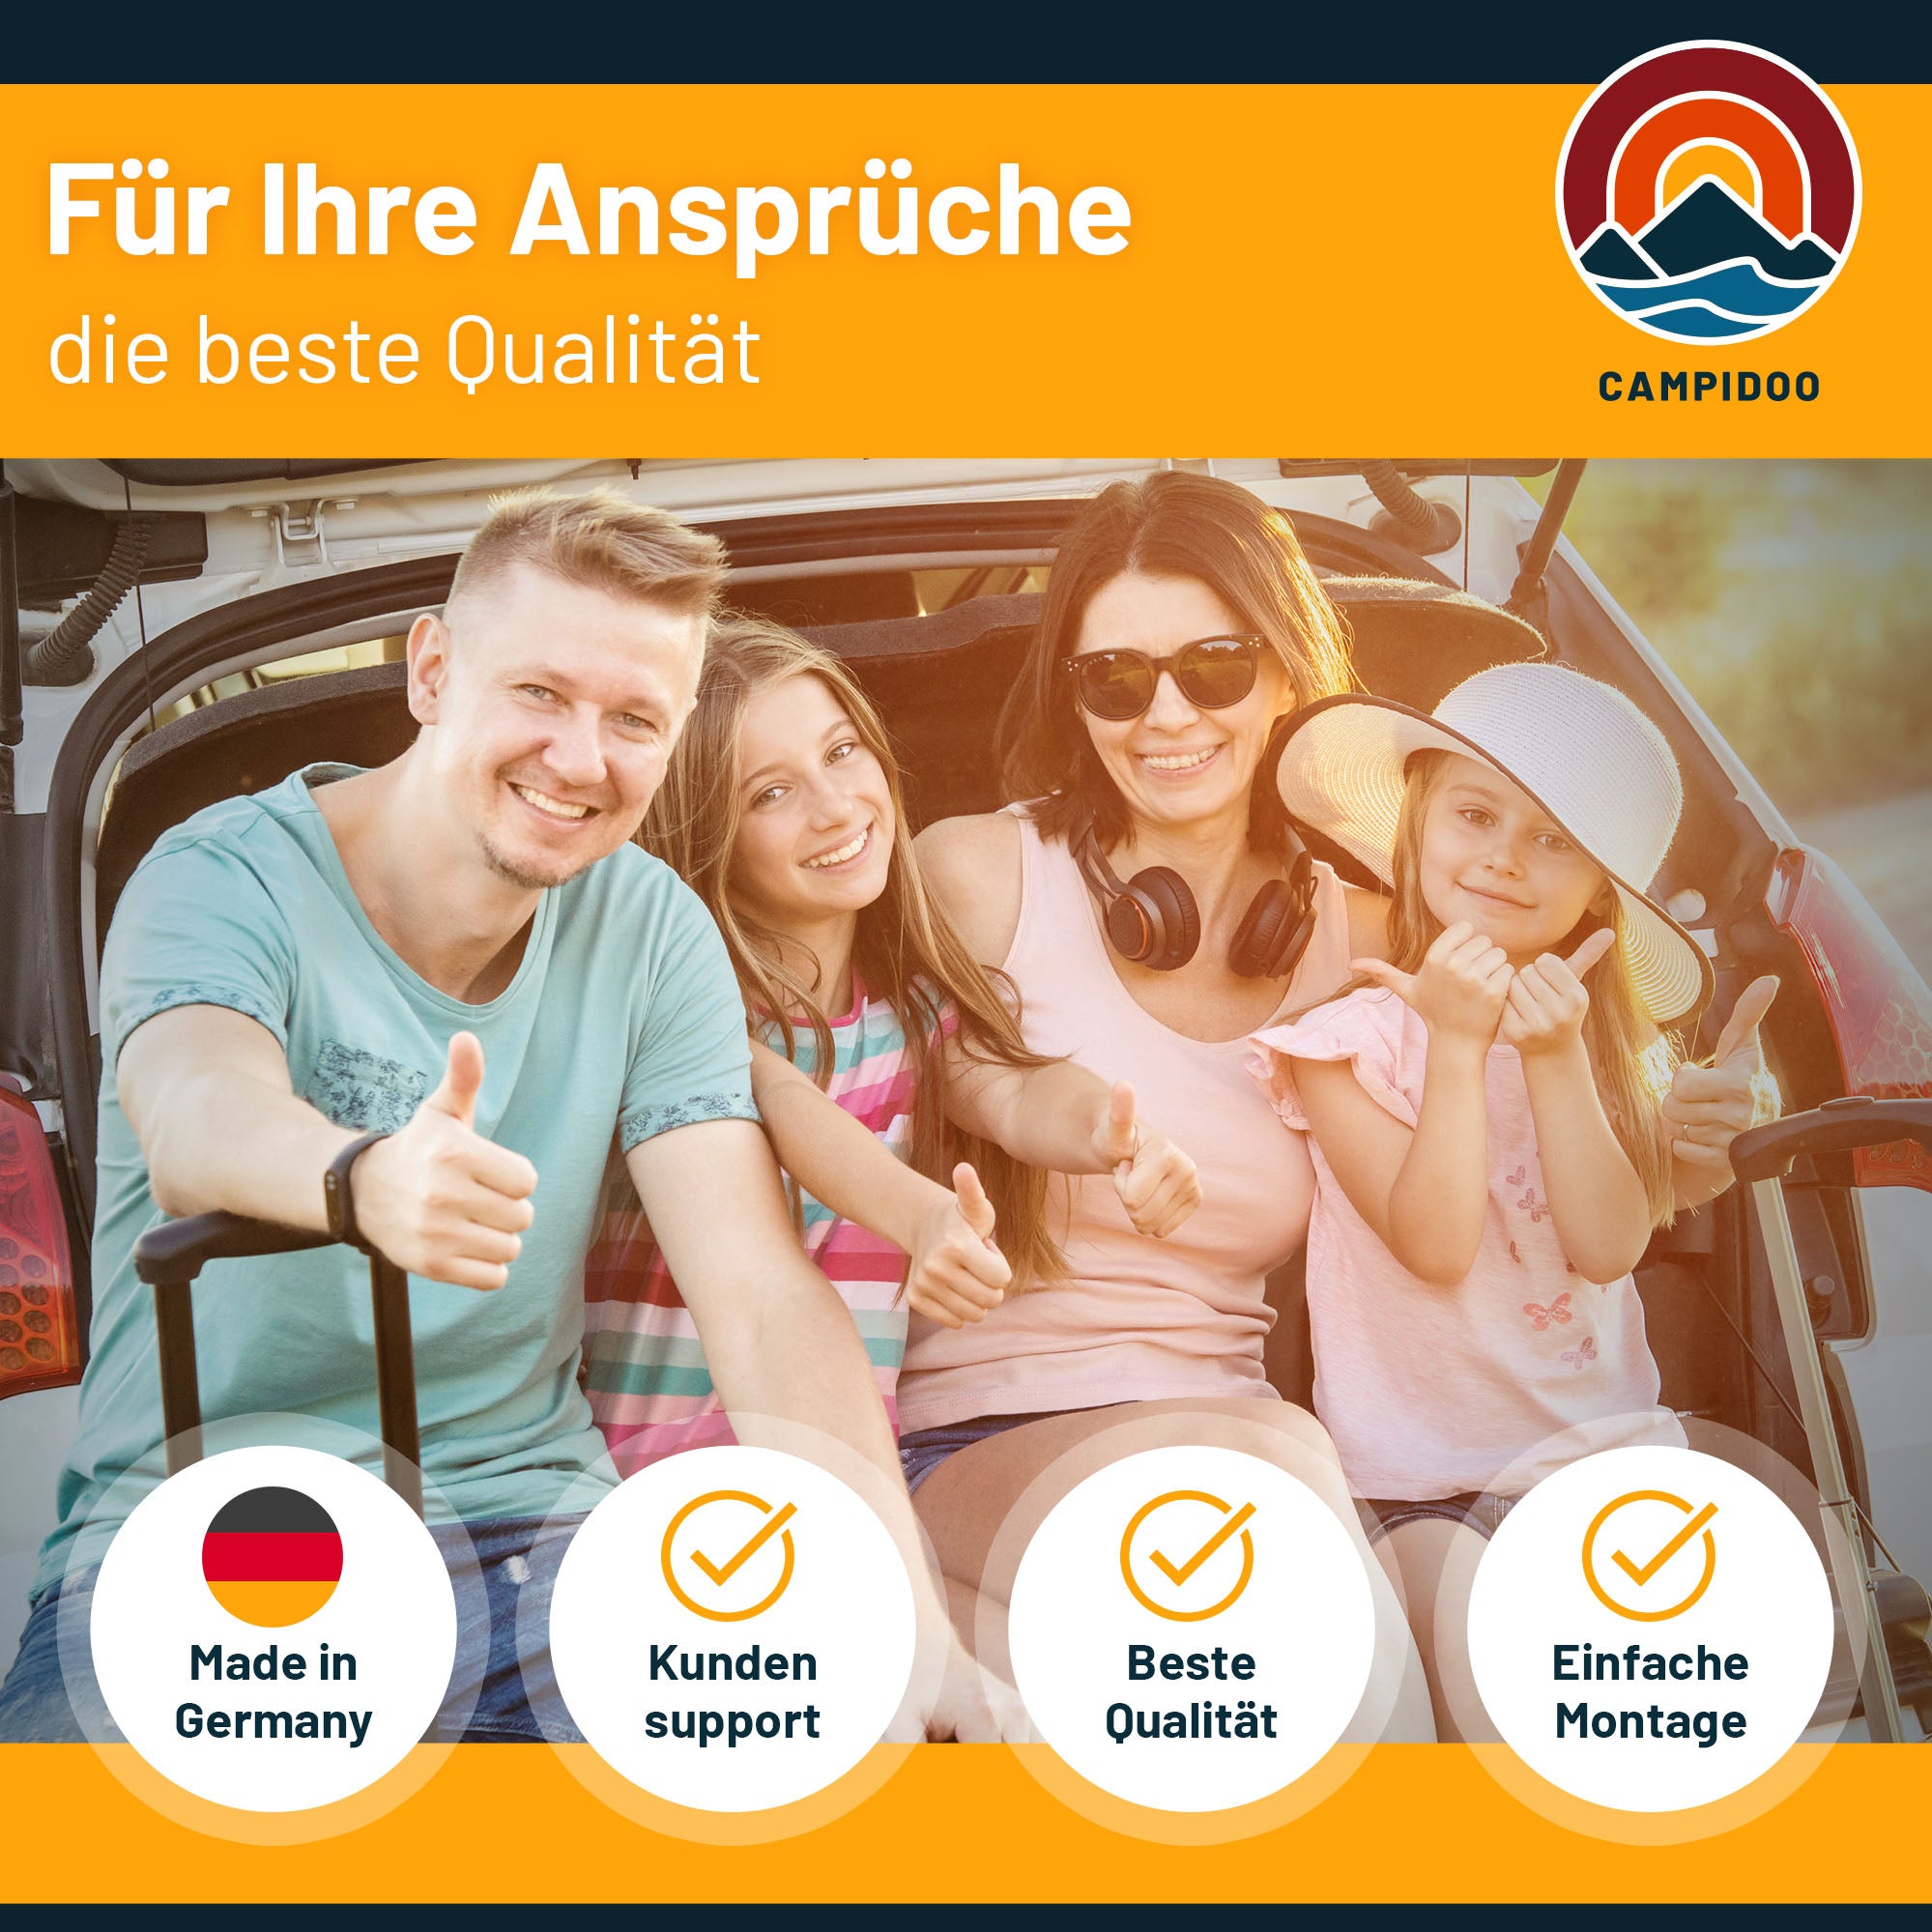 Camping Aufkleber "Ab ans Meer"